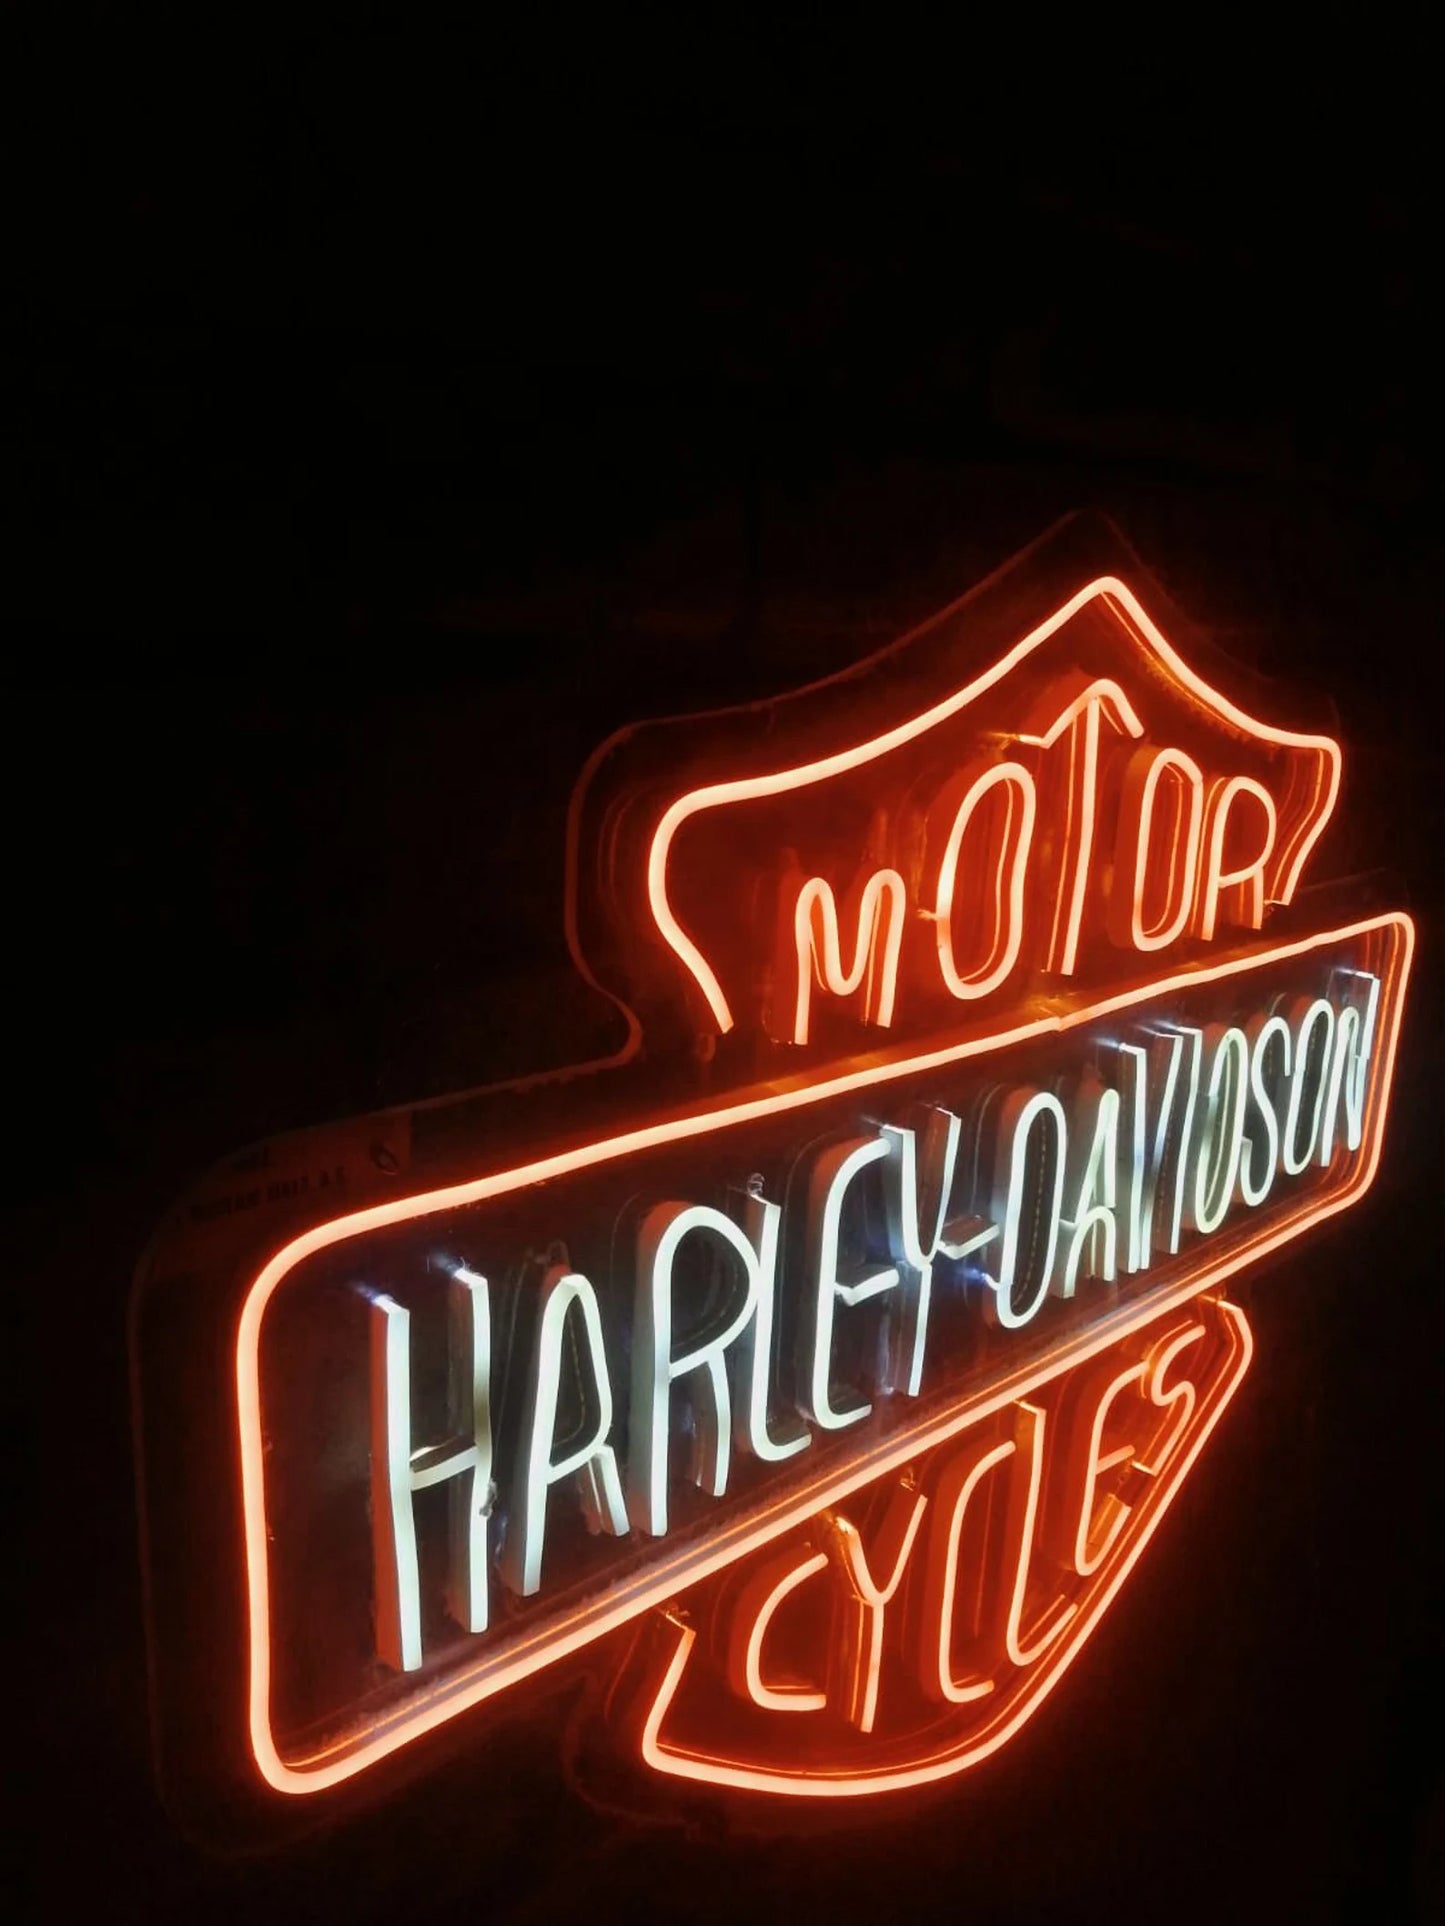 Brand New Harley Davidson Neon Sign - High Quality & Bright. Perfect Addition to Your Collection I